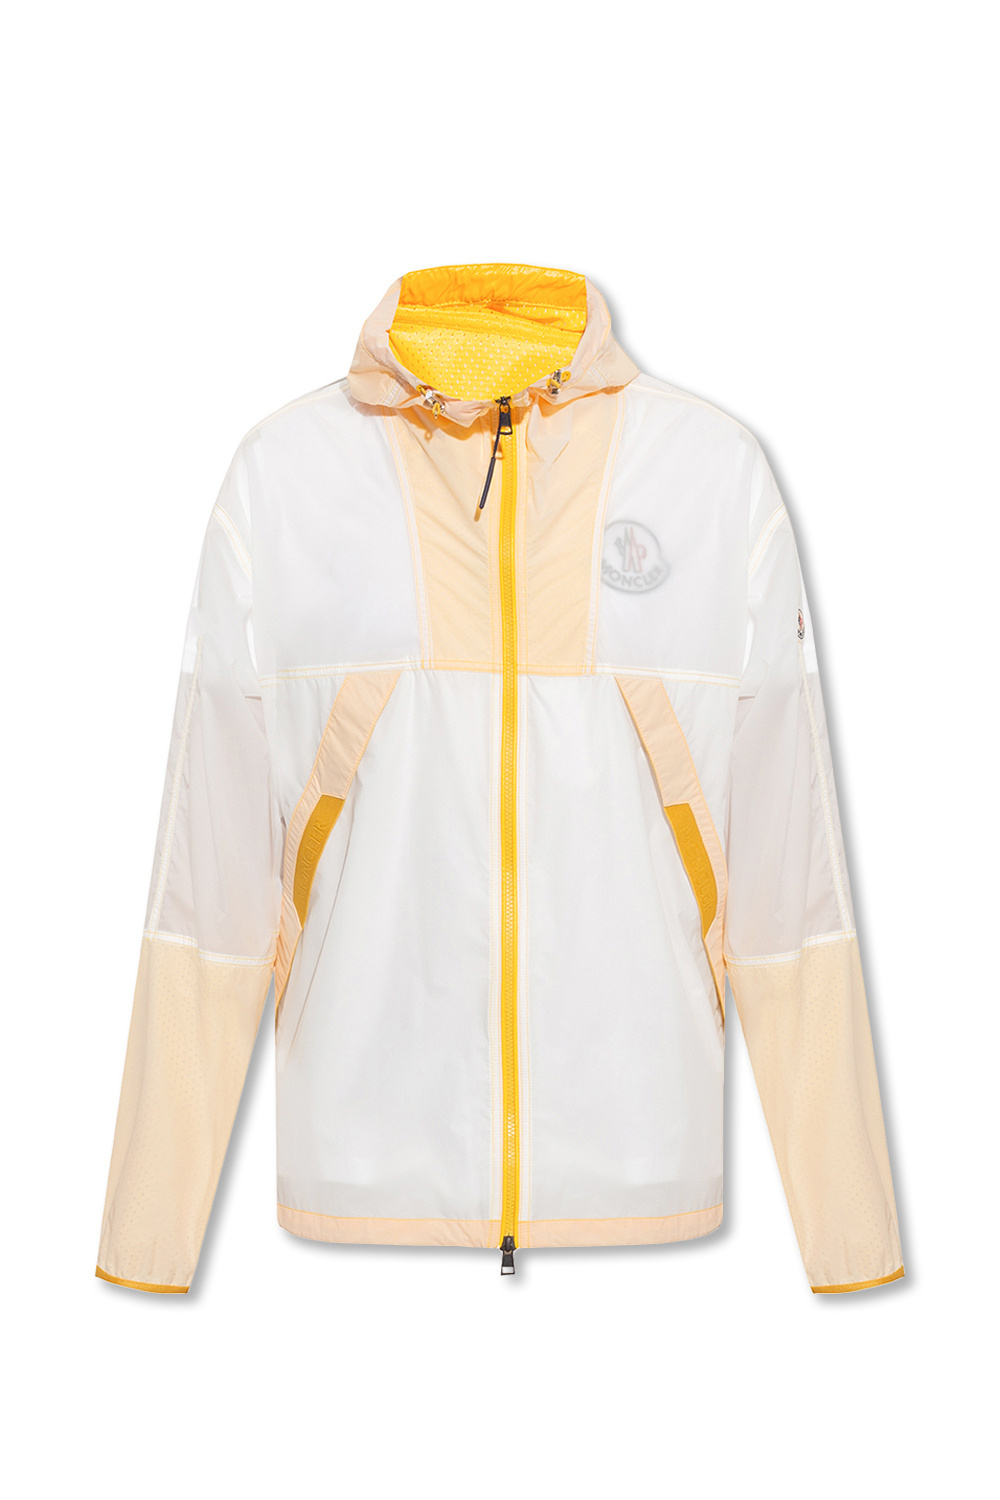 White Mens Jackets Moncler Jackets for Men Moncler Doi Casual Jacket in Dark Yellow 